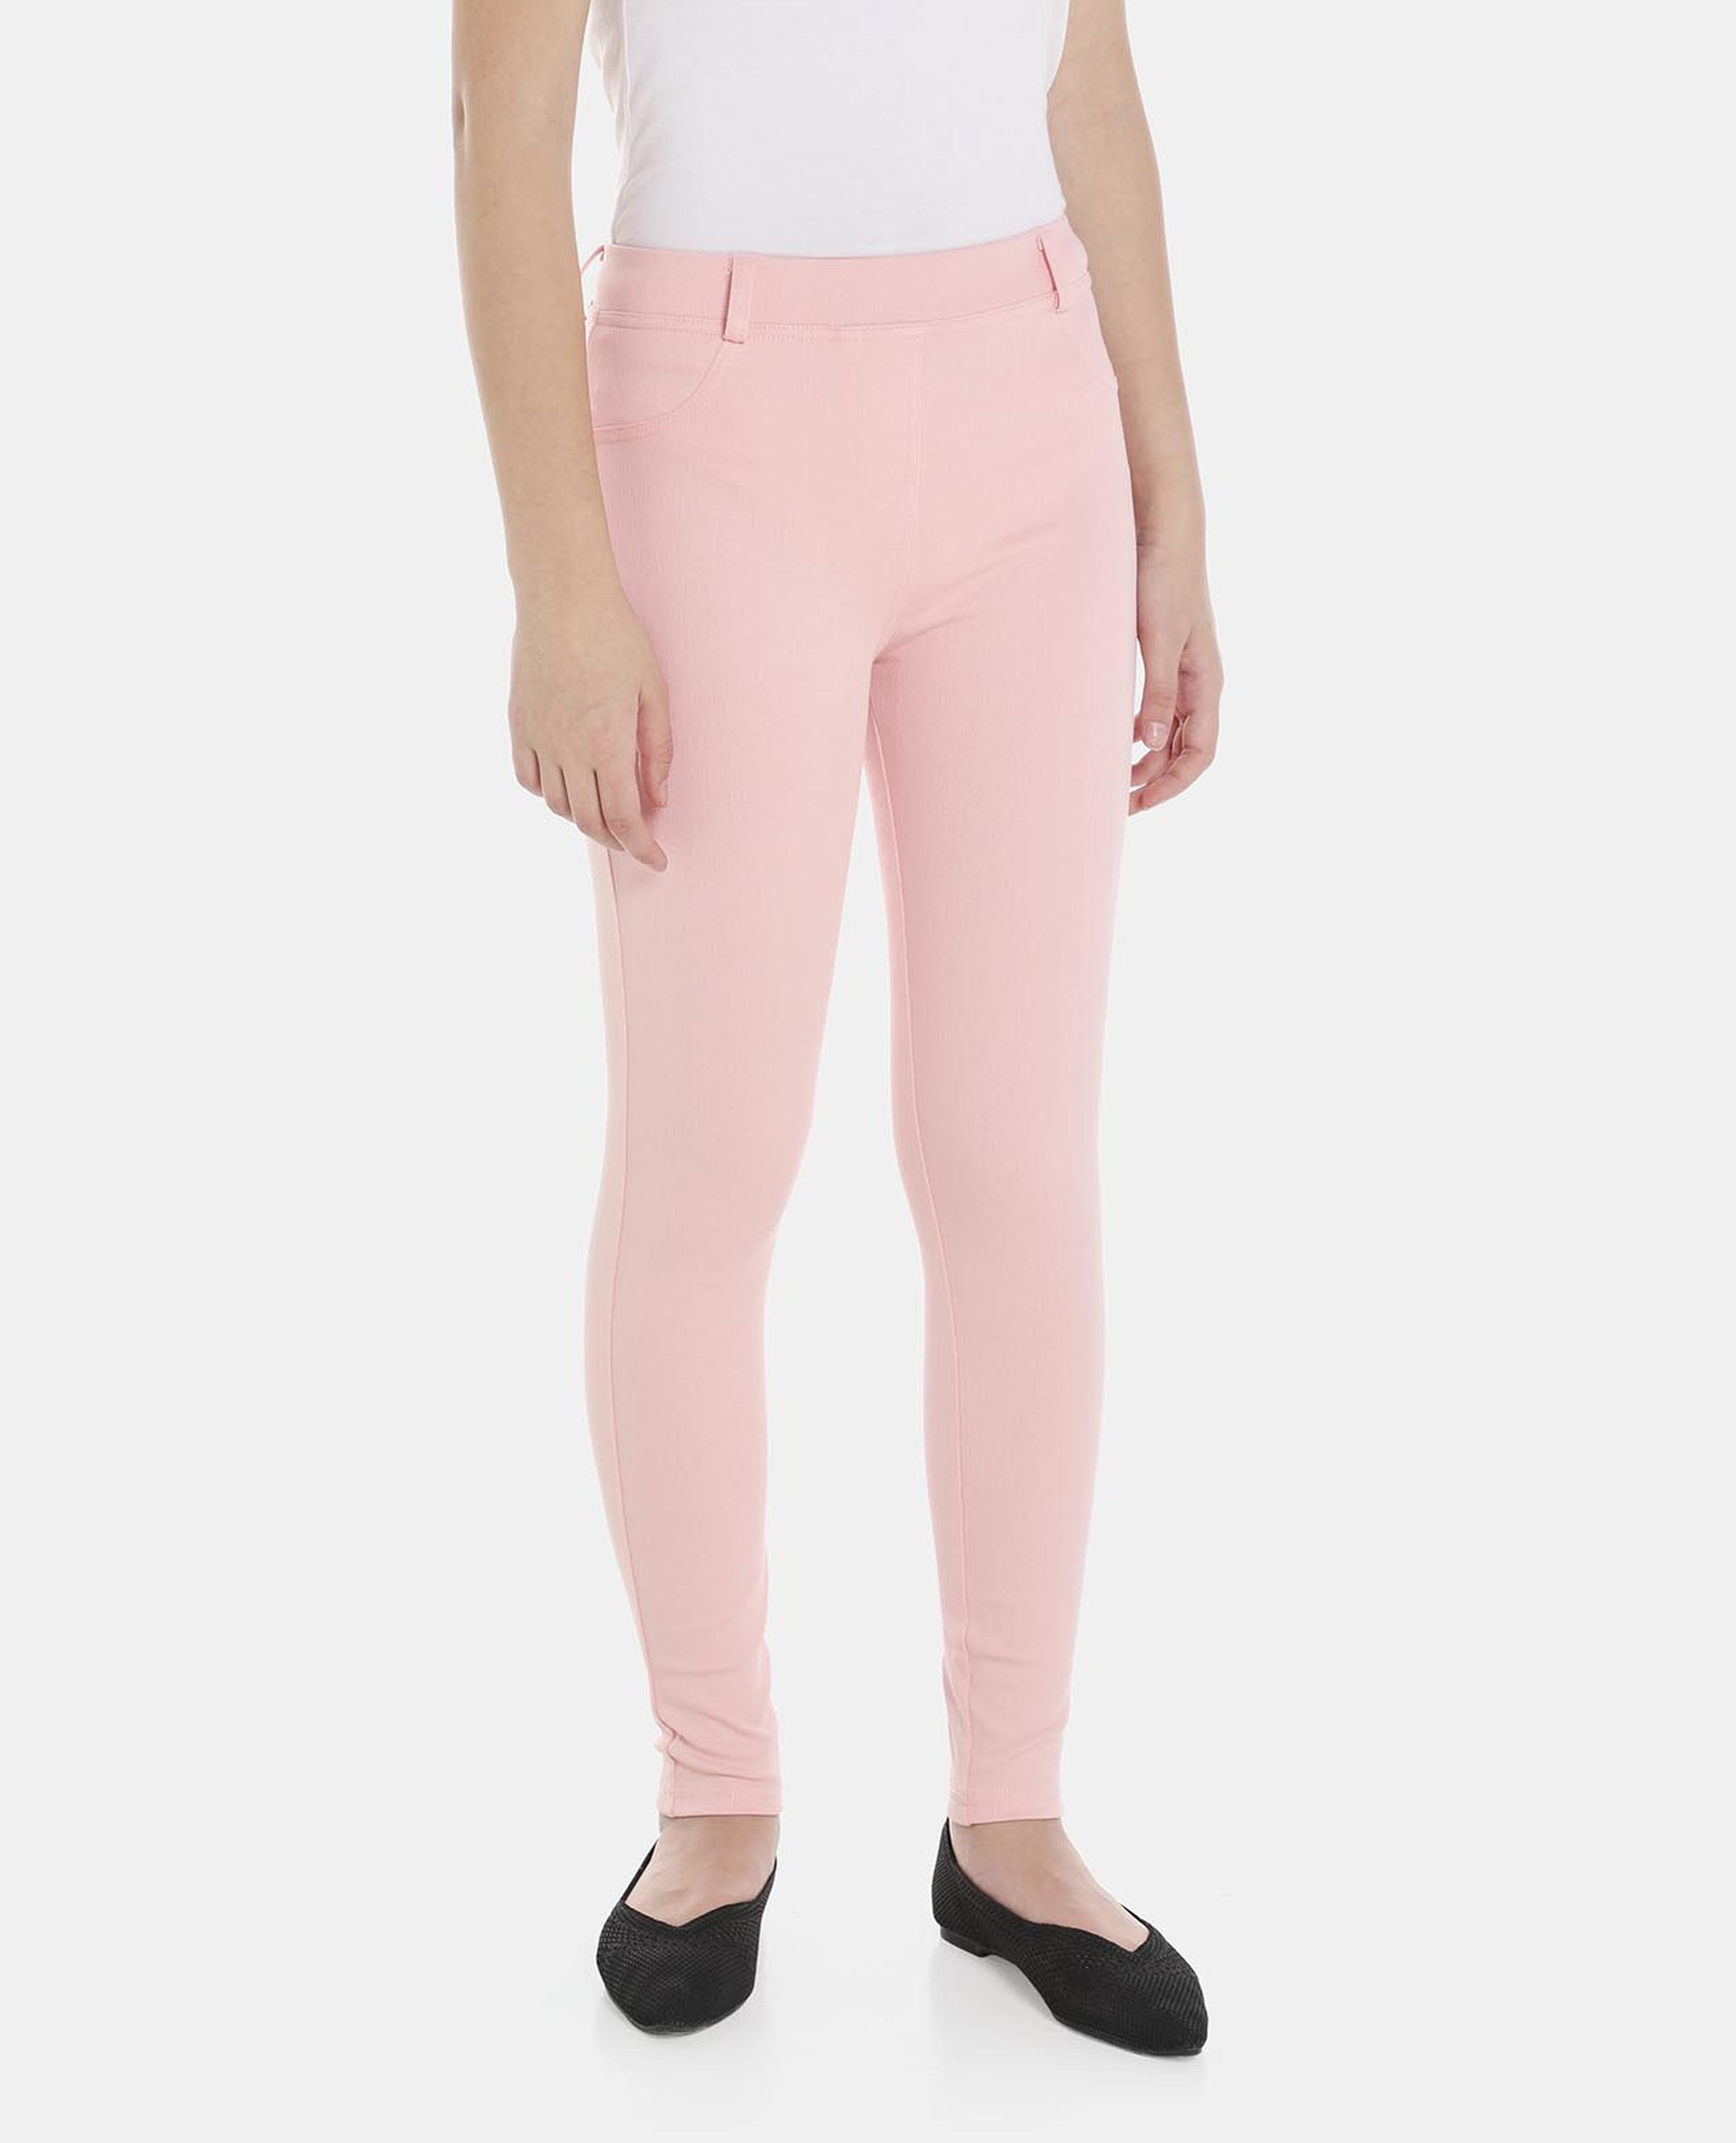 Pink Polyester Knit Pant